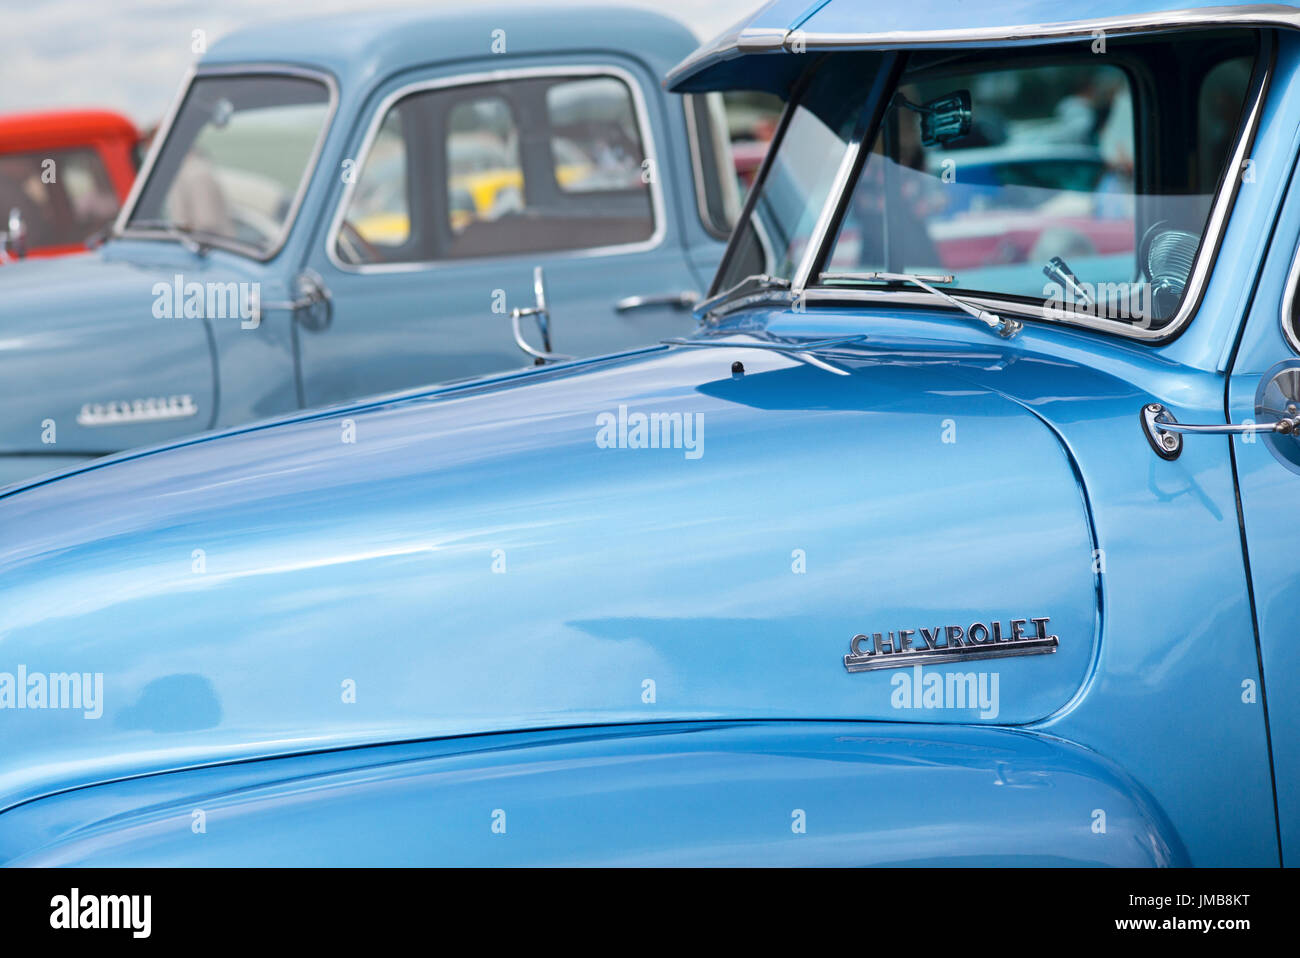 1951 Blue Chevrolet pickup truck at an american car show. Essex. UK Stock Photo